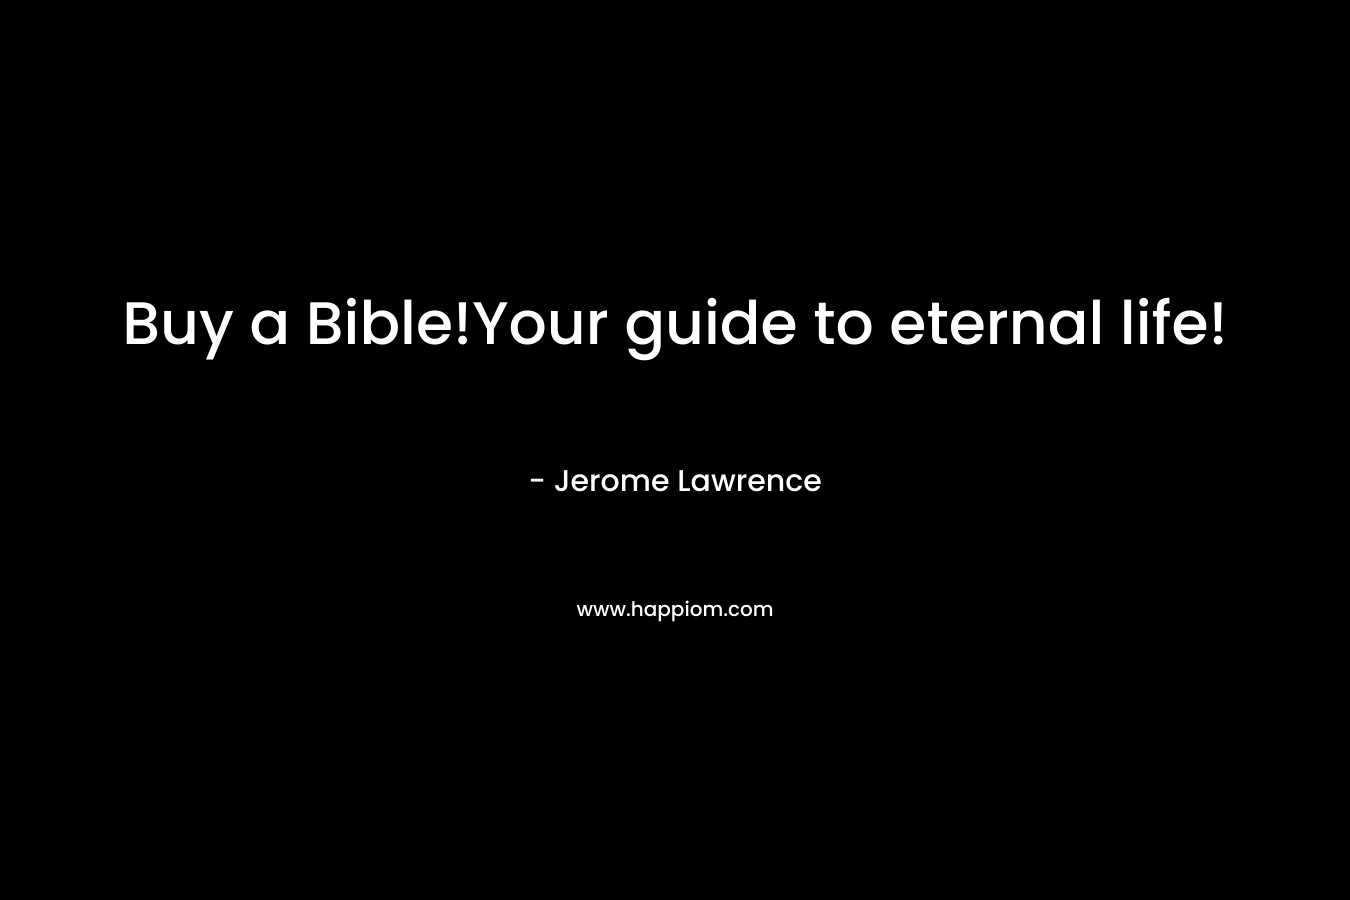 Buy a Bible!Your guide to eternal life!